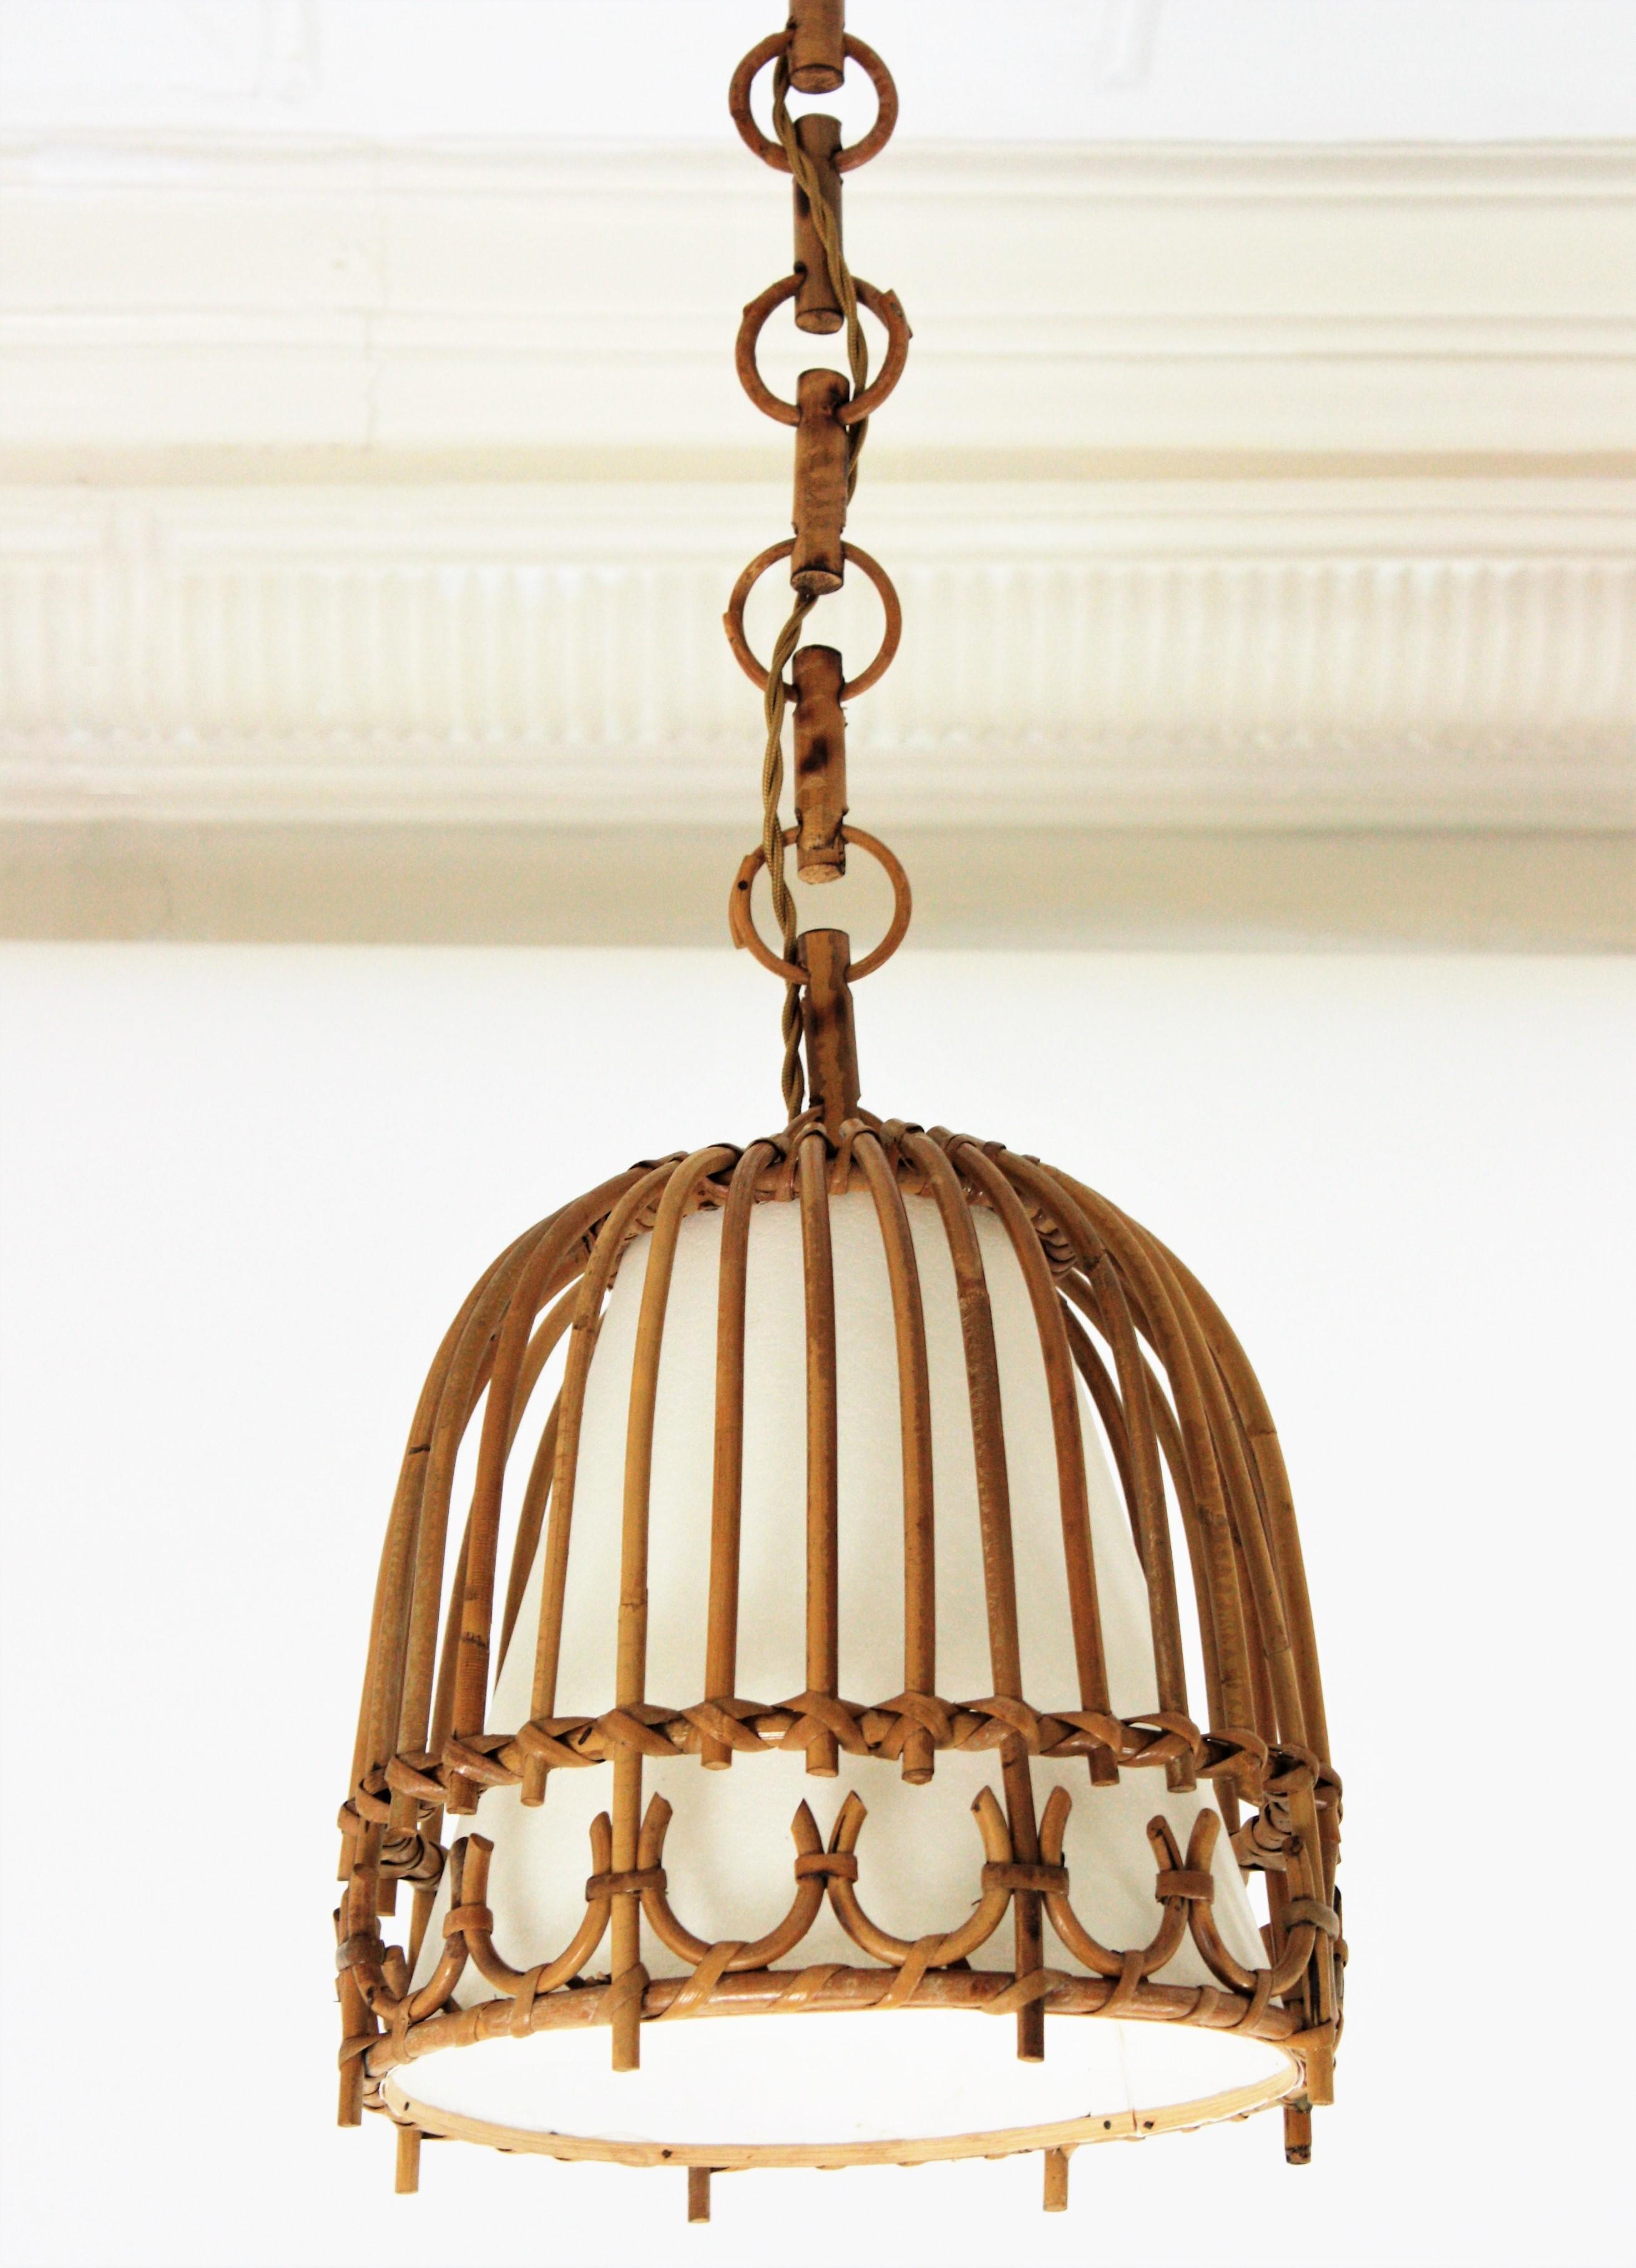 A cool handcrafted rattan ceiling lamp / pendant hanging light with geometric decorative accents, Spain, 1960s.
The chain is composed by alternating bamboo sticks and rings joined between them. It hangs from a wooden canopy and it has a conical